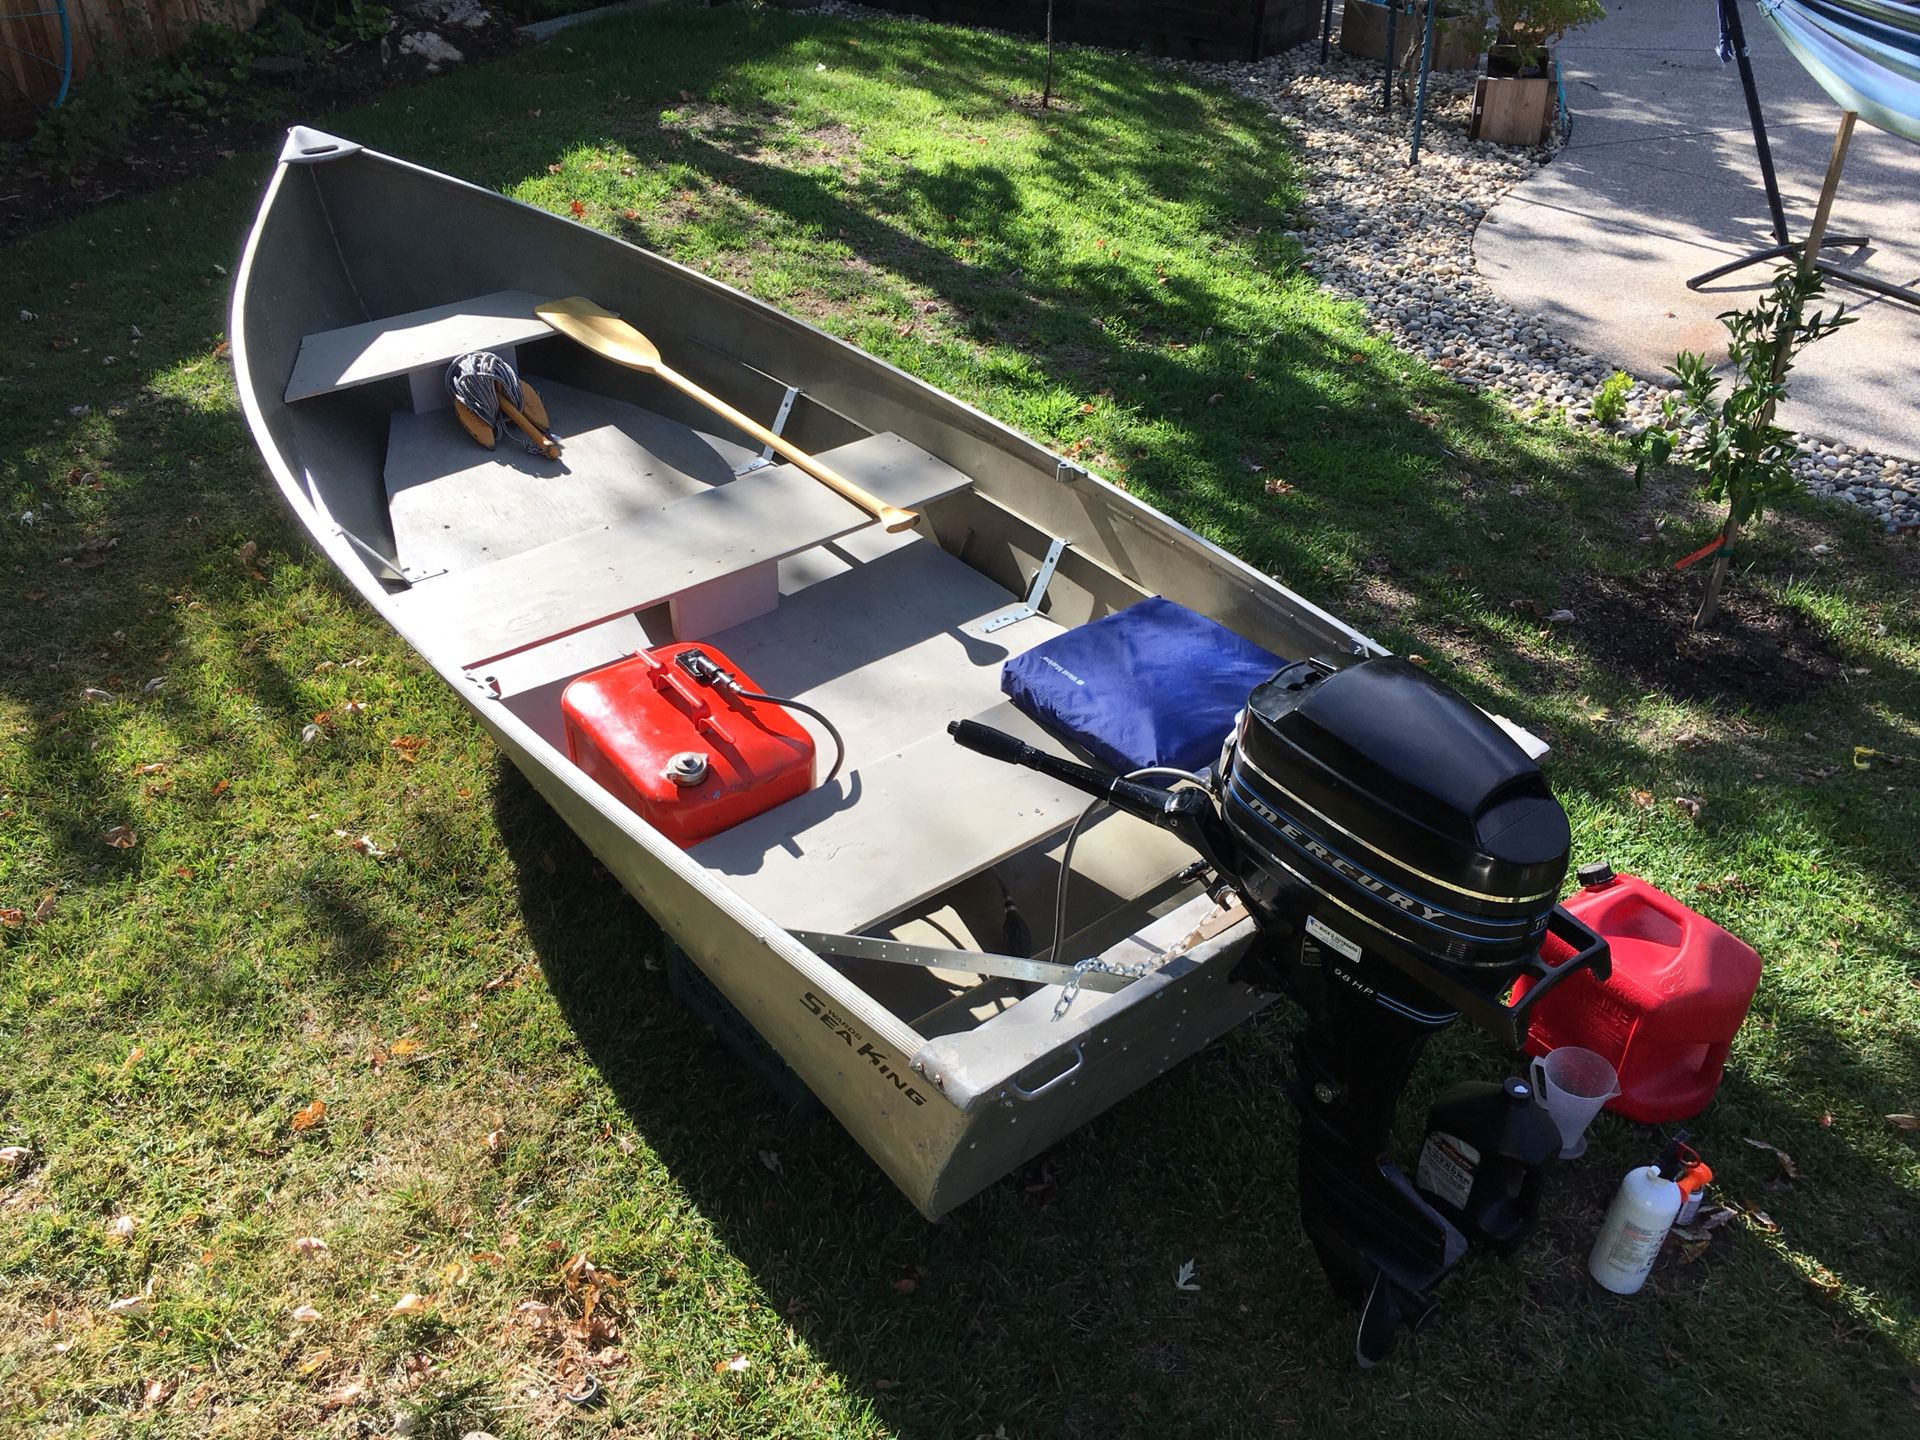 Sea King 12 foot aluminum boat with motor and accessories